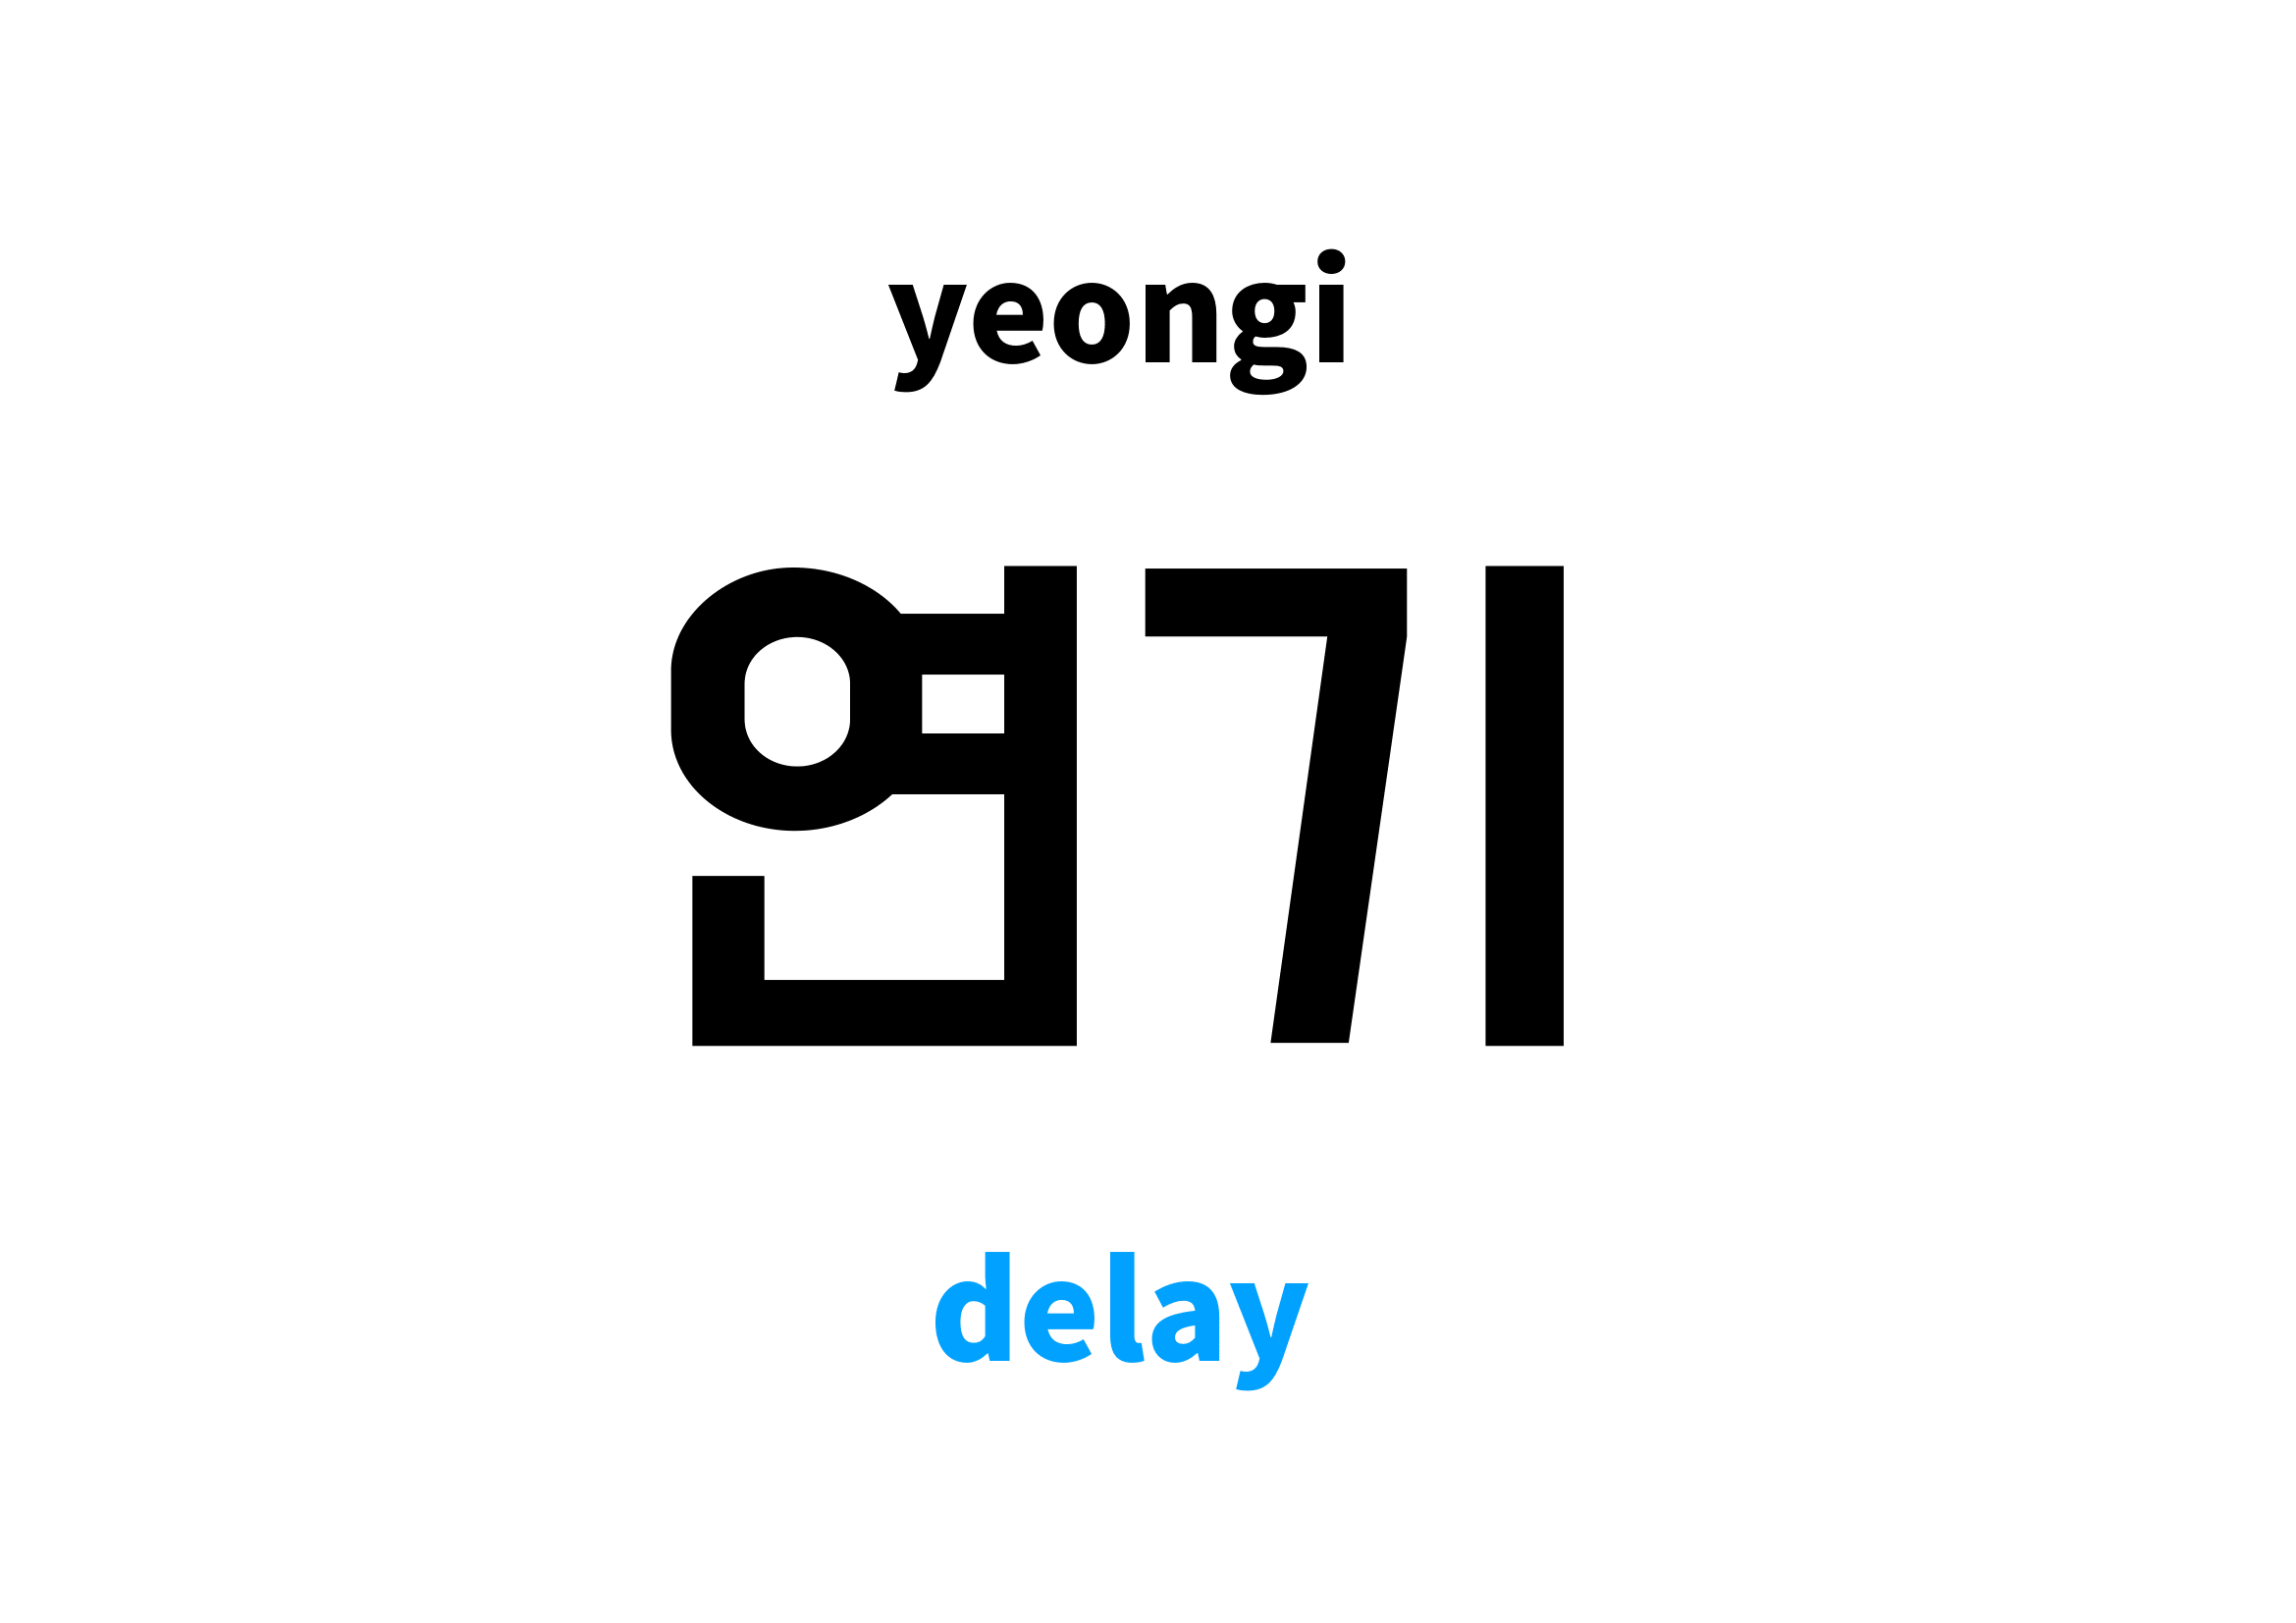 DELAY - Meaning and Pronunciation 